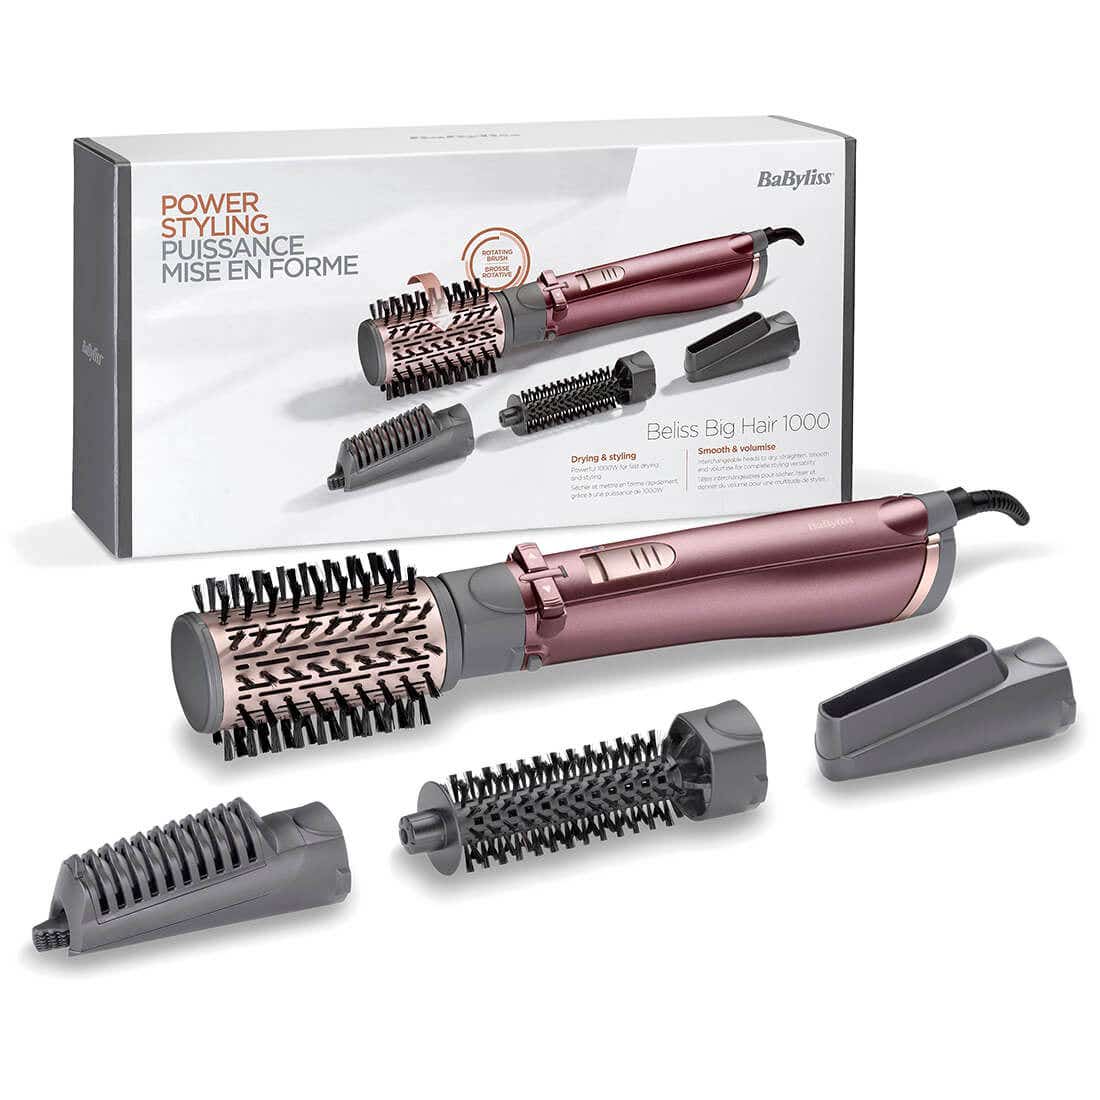 Babyliss Rotating Brush Air Styler 1000w With Pouch